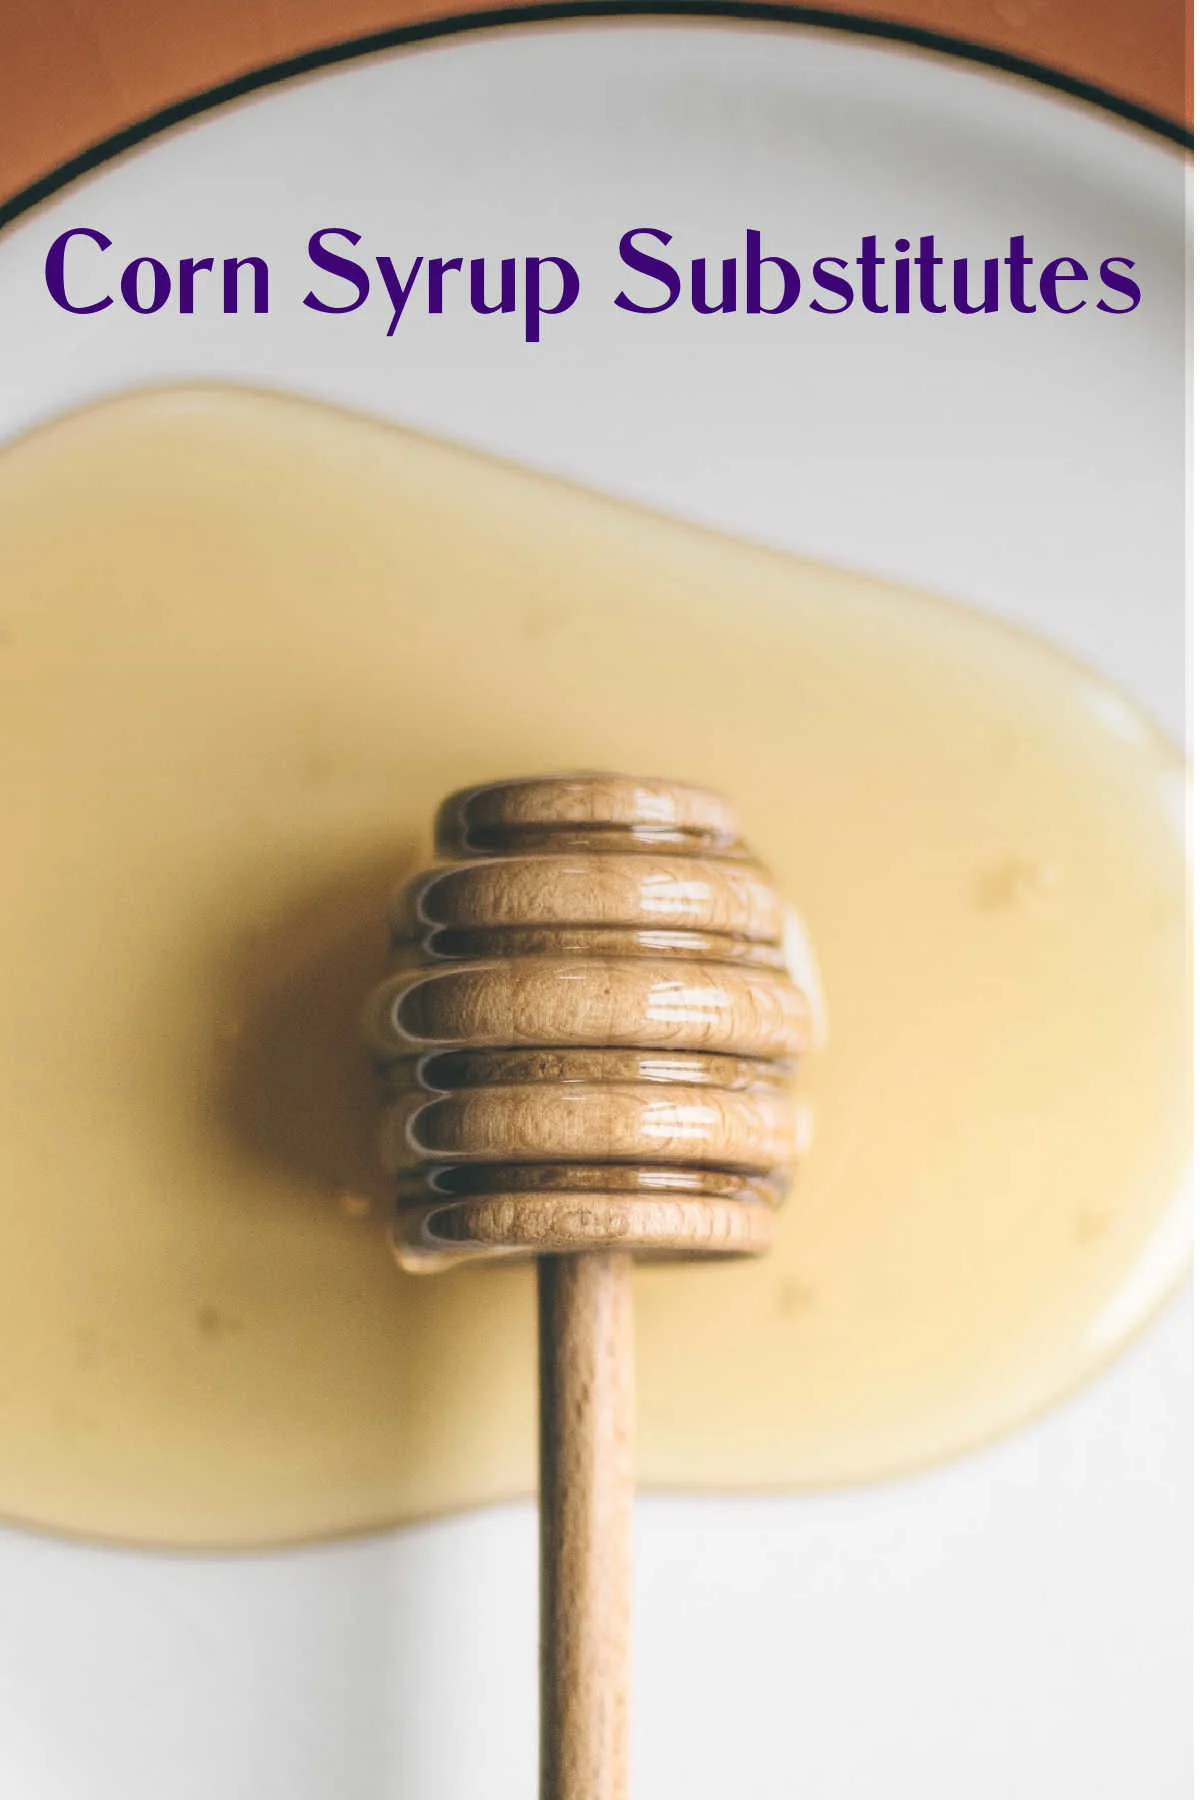 honey drizzling wand over pool of syrup on plate with text saying corn syrup substitutes.